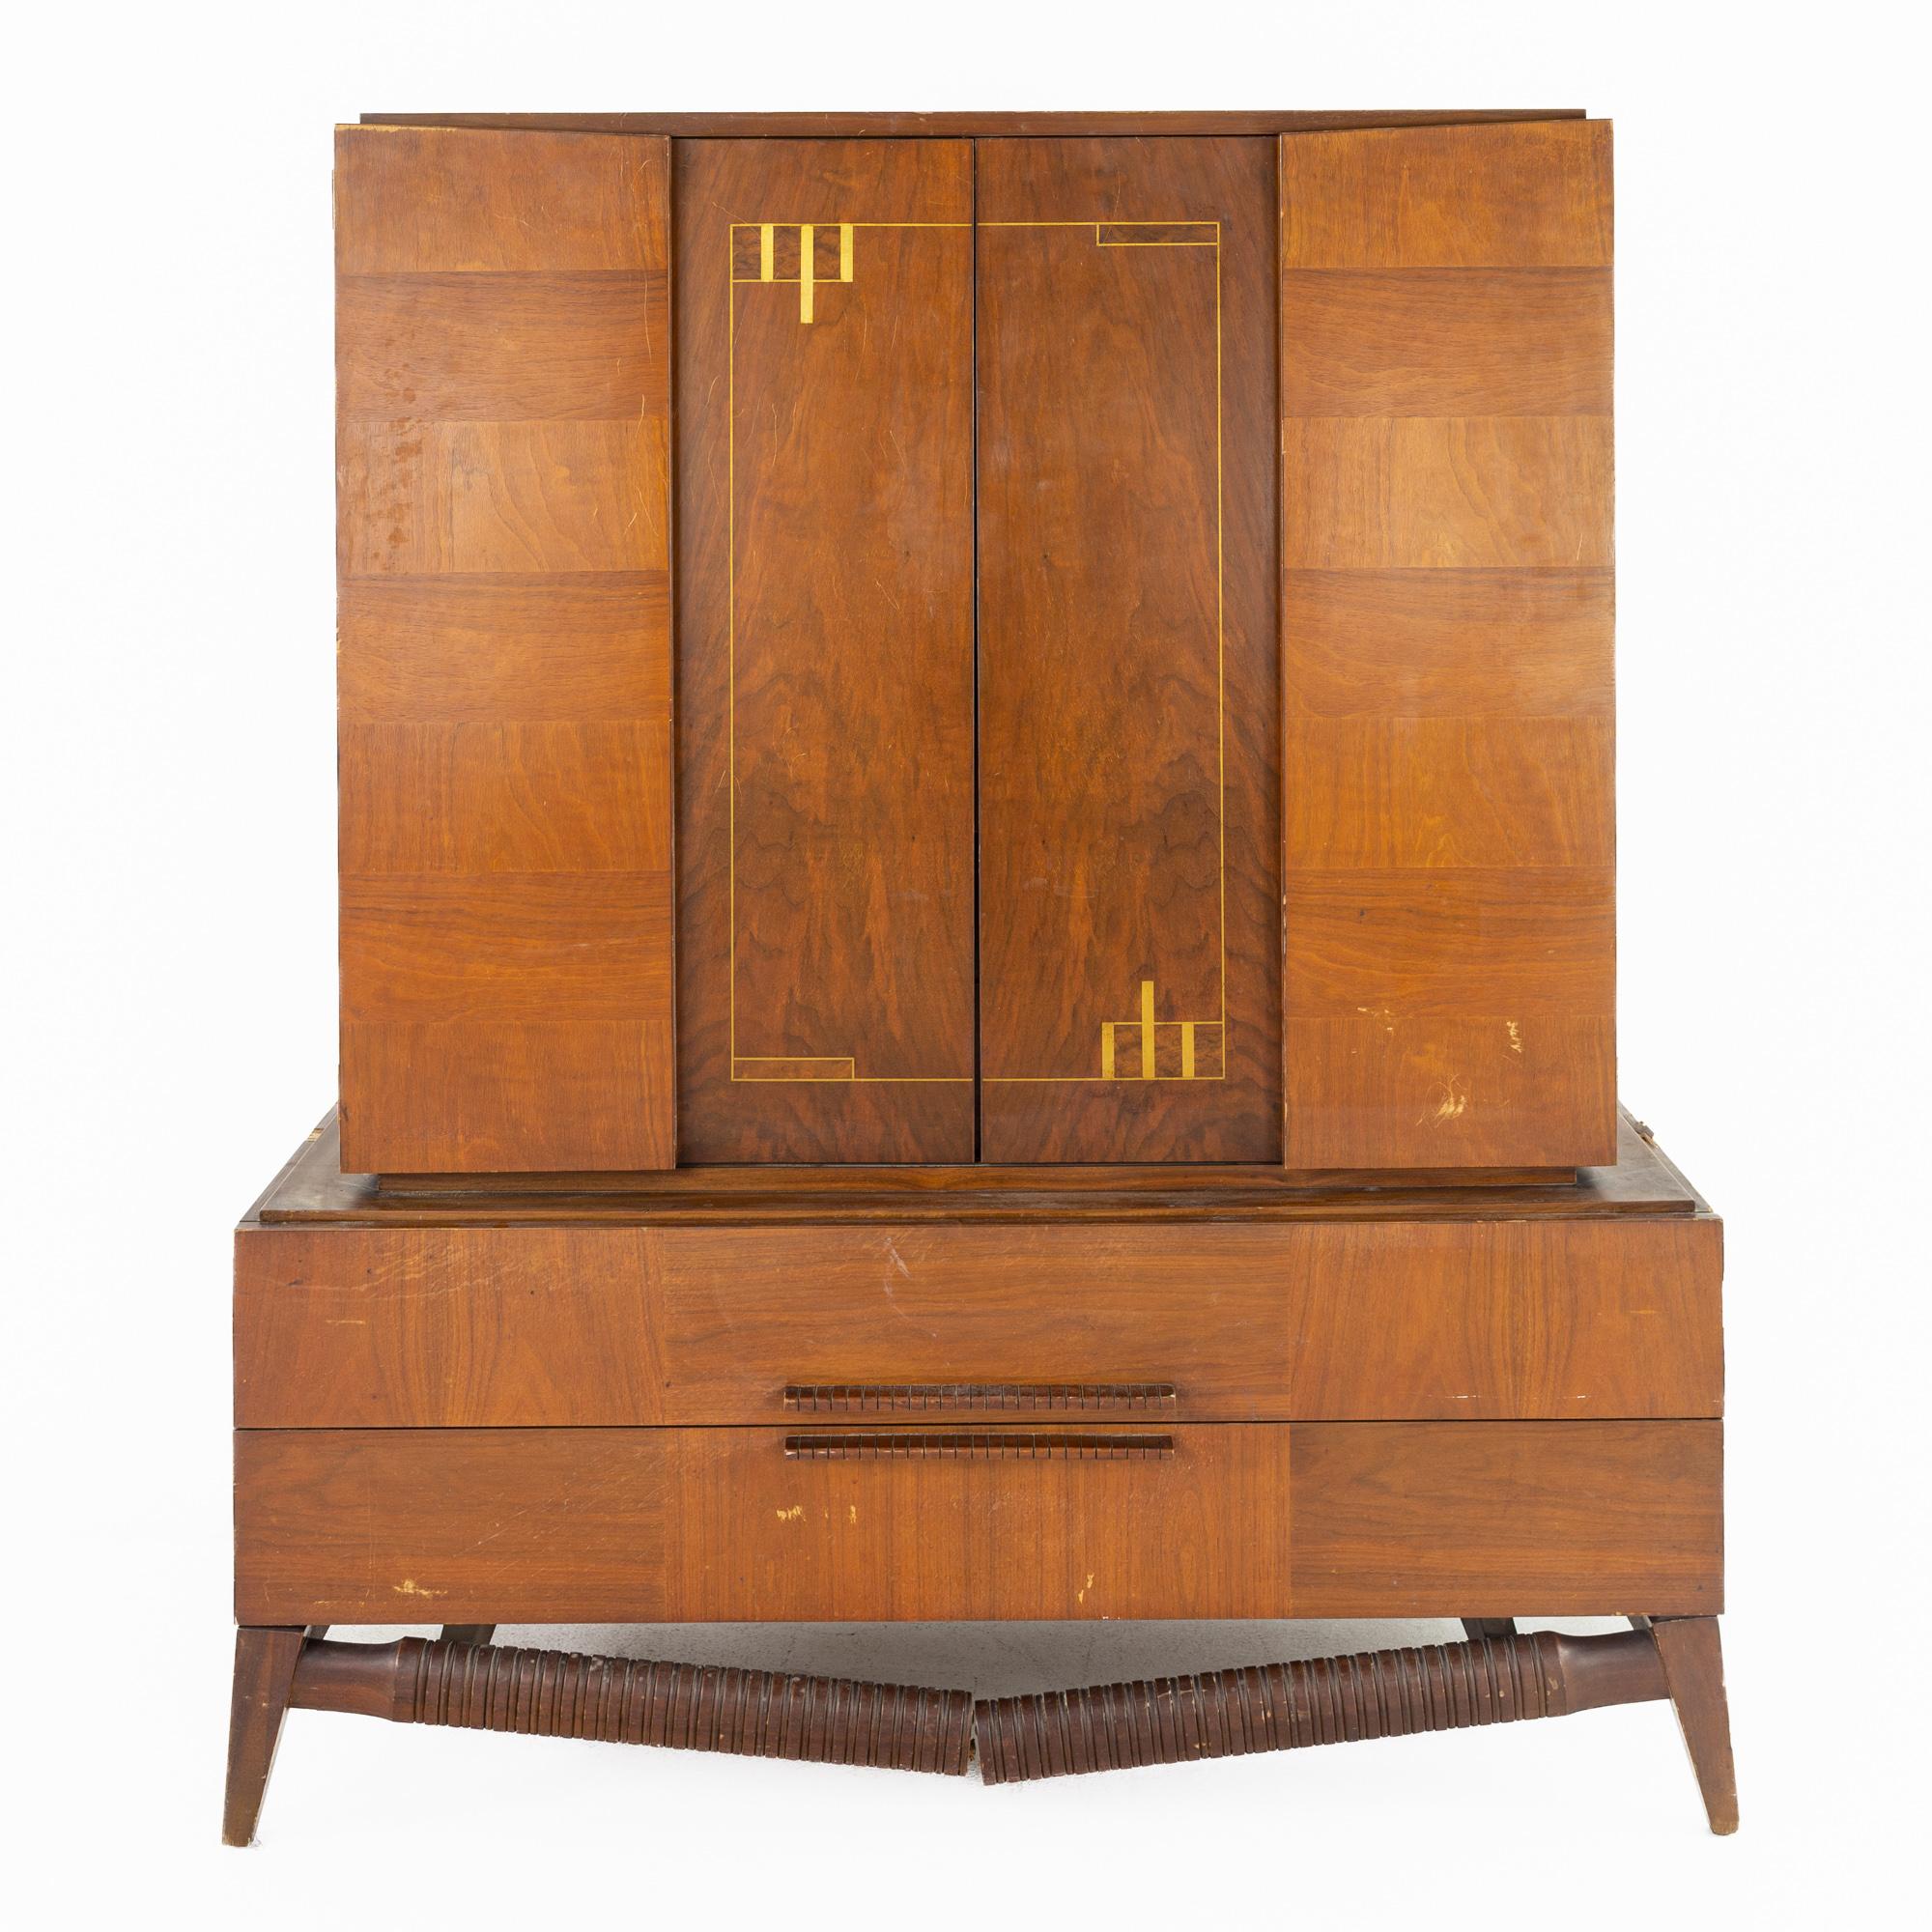 Albert Parvin style mid century walnut highboy dresser gentlemans chest armoire.

This dresser measures: 48 wide x 22 deep x 57 inches high.

All pieces of furniture can be had in what we call restored vintage condition. That means the piece is